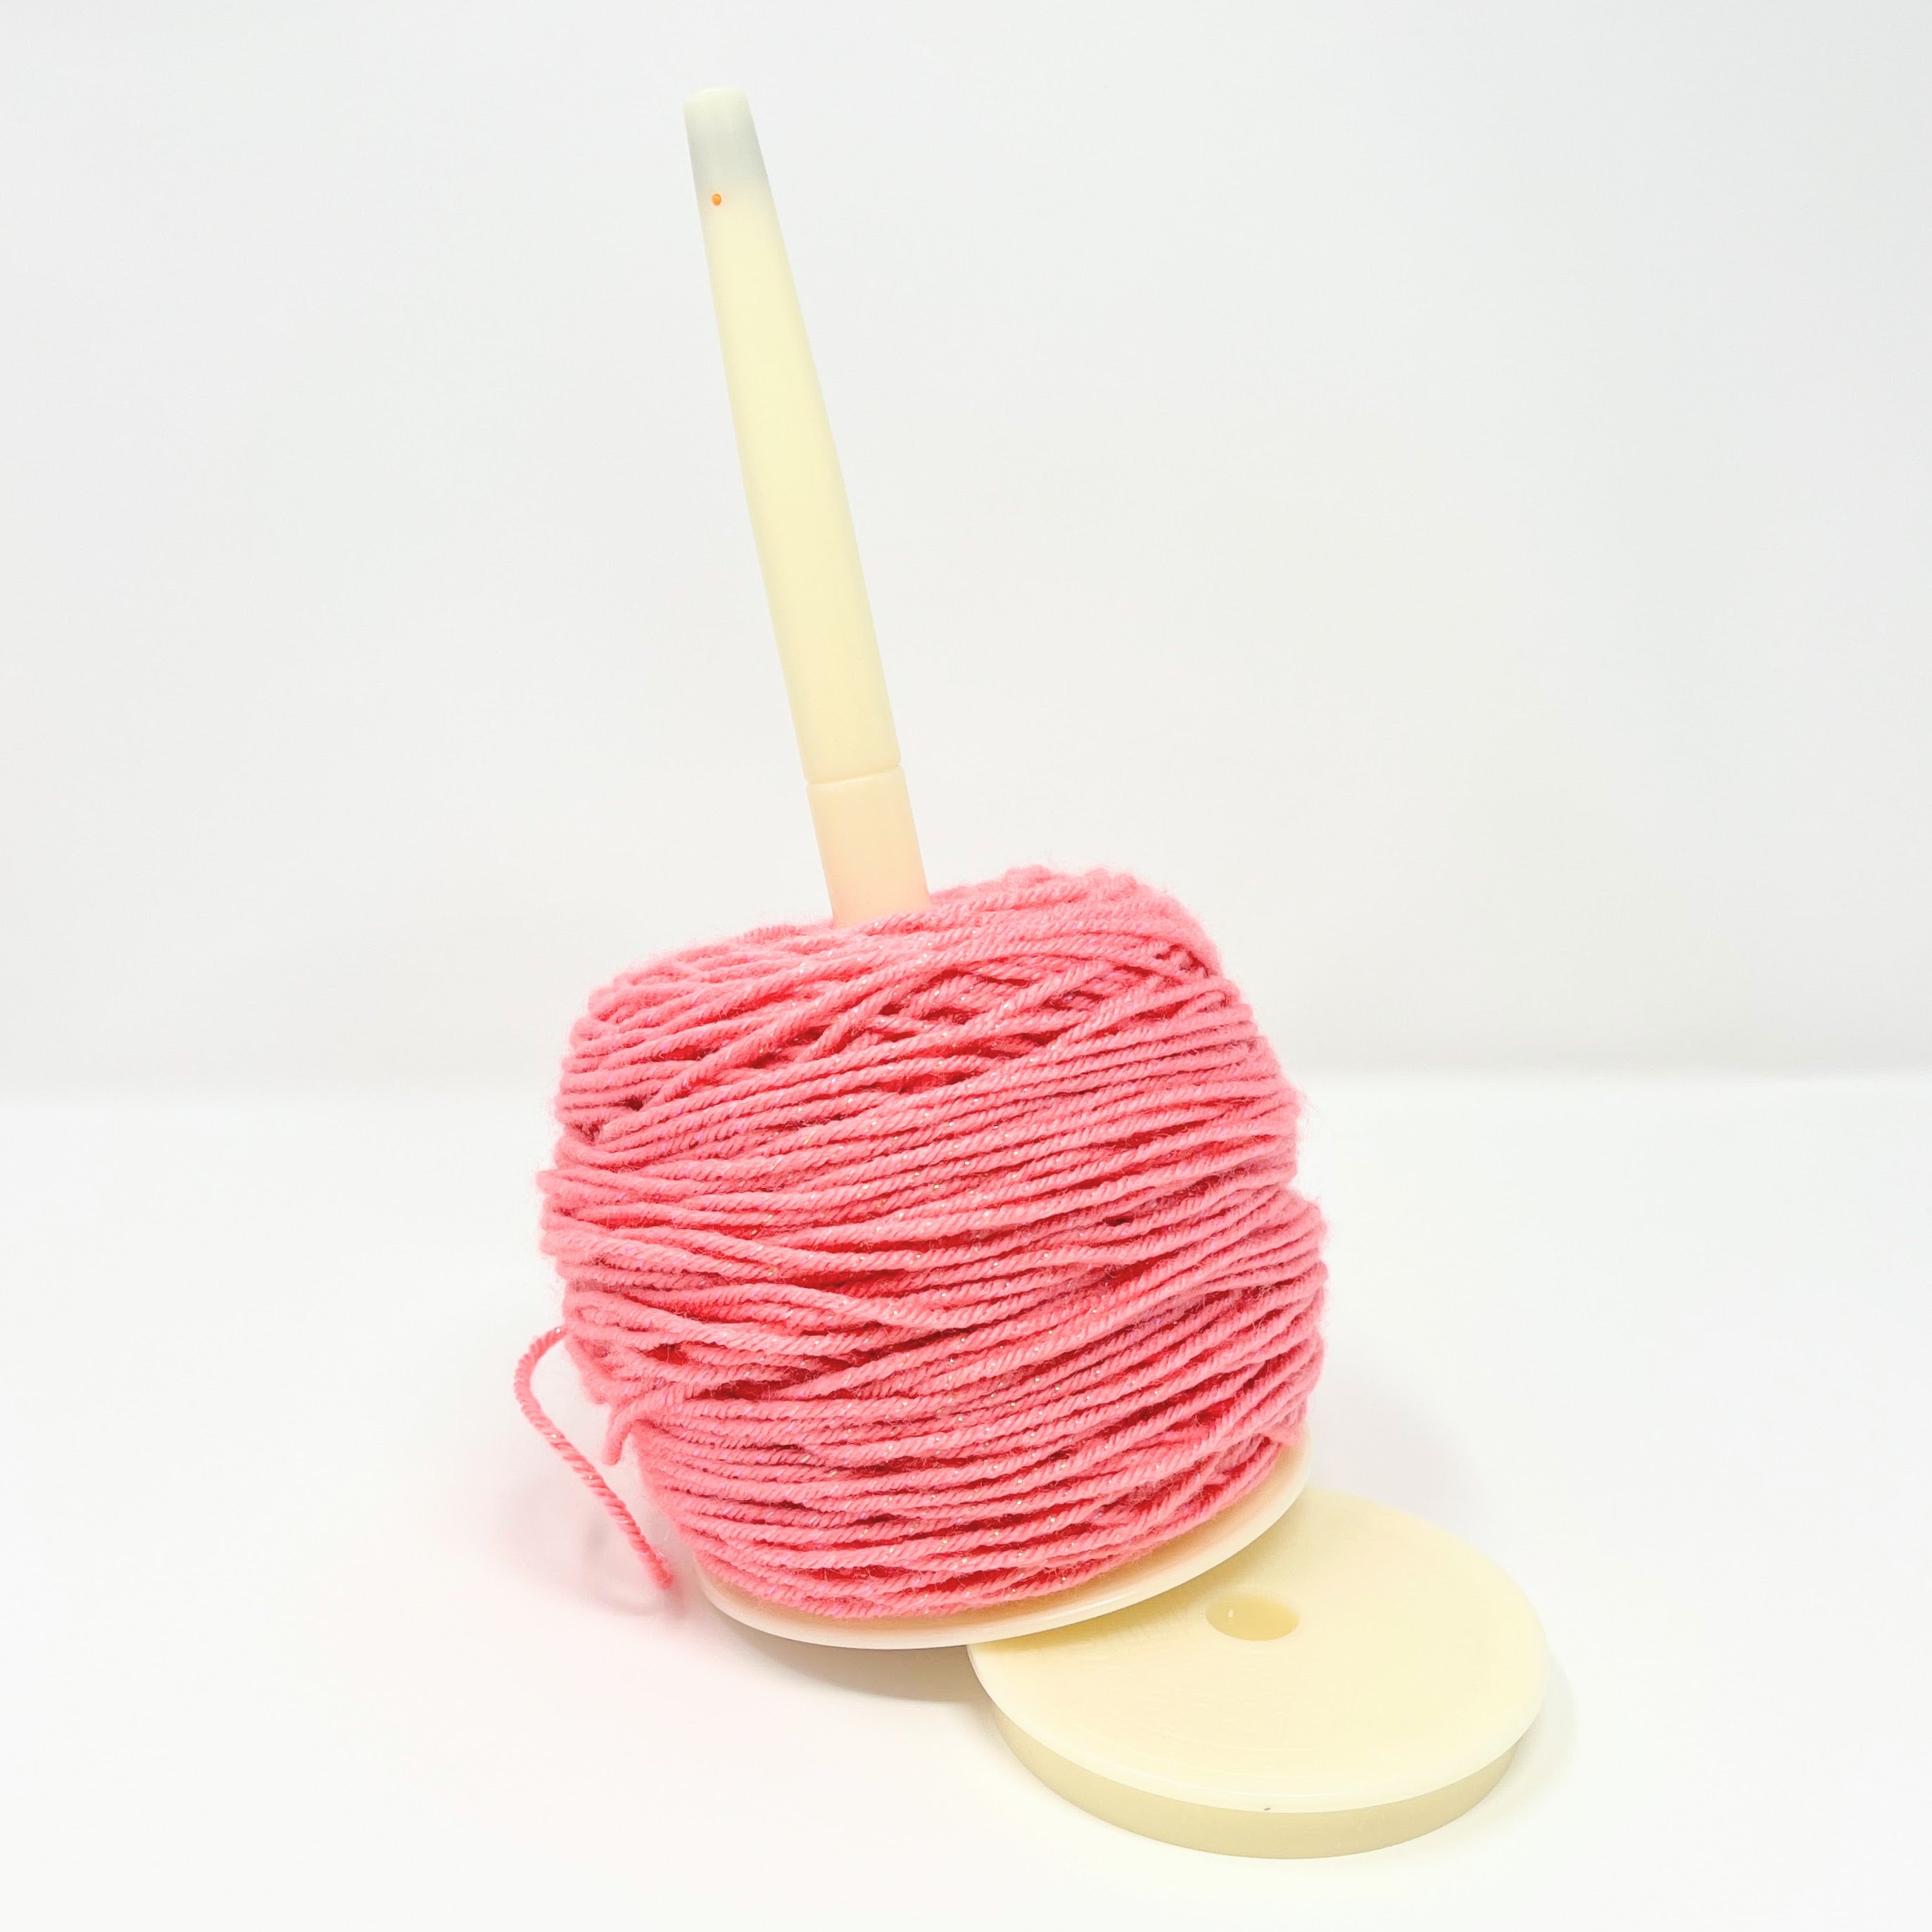 The wool jeanie extra spindle